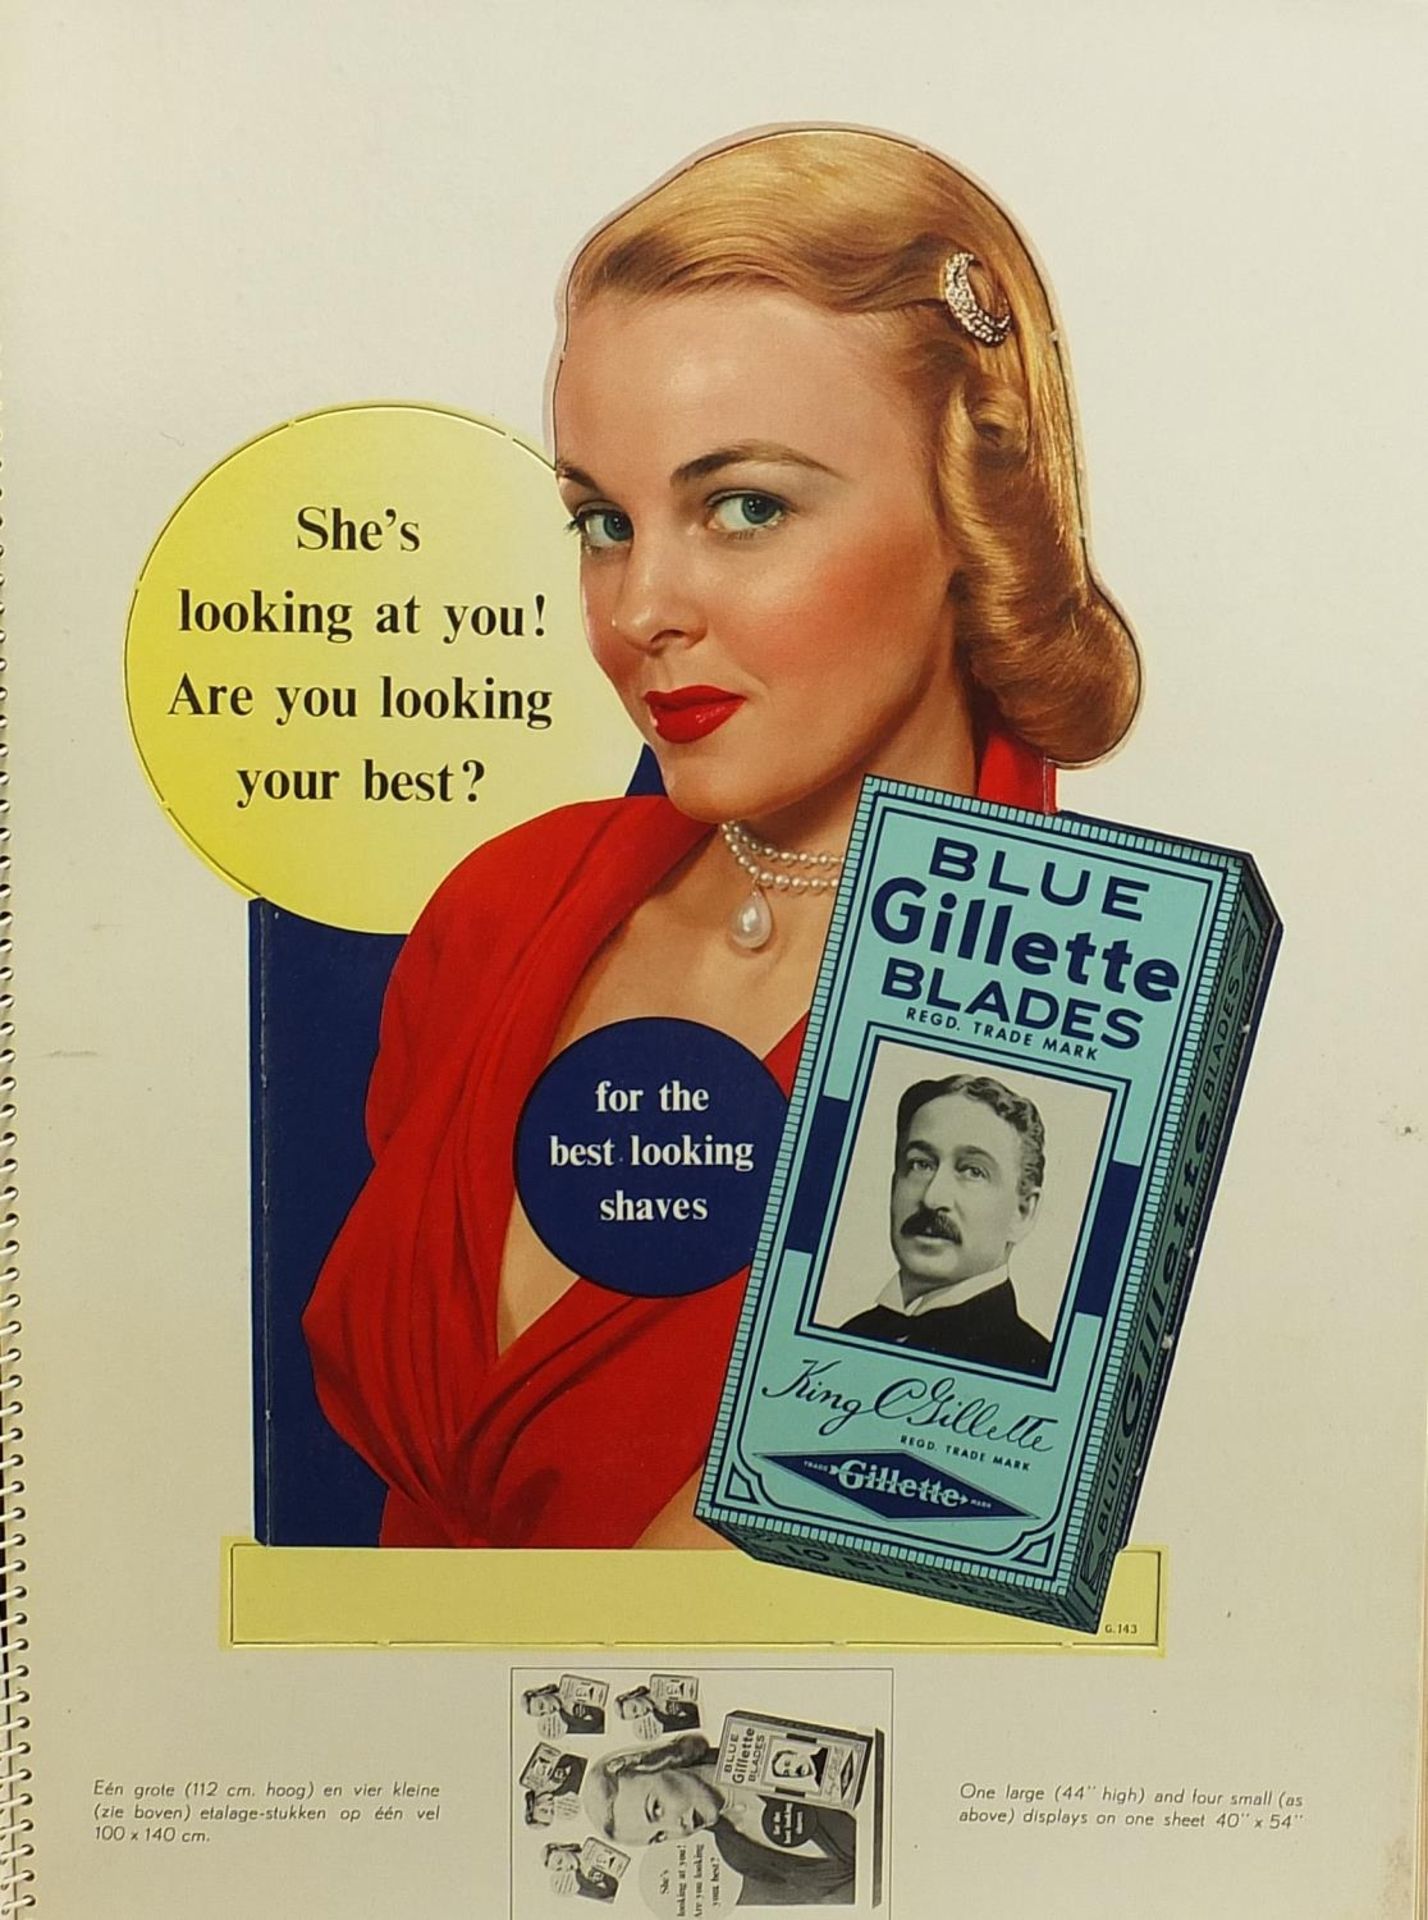 Large Smeets Photo-Offset advertising hardback book including Gillette advert layout, with wrap - Image 2 of 6